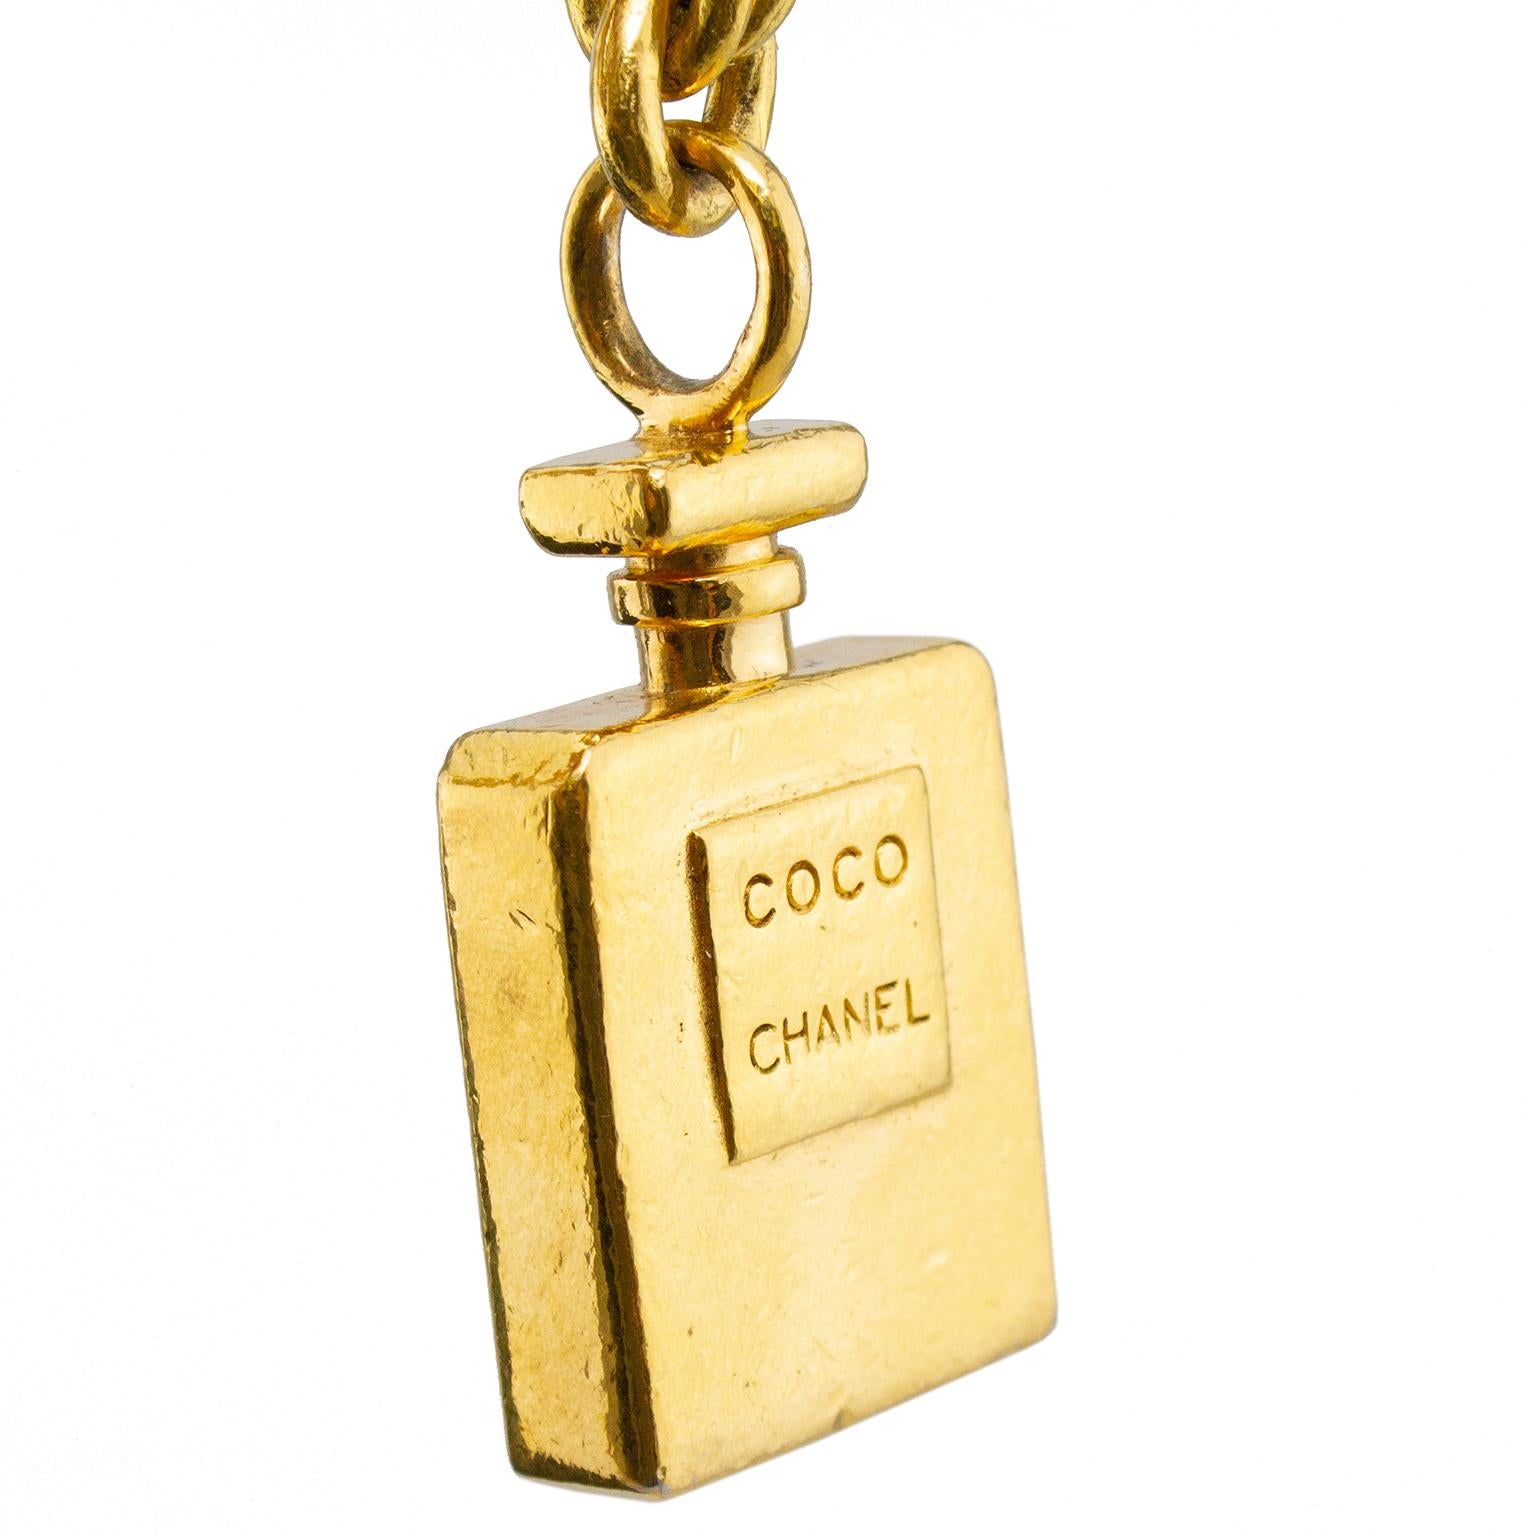 1990s Chanel thick gold tone chain link necklace with pendant of the iconic Chanel No 5 perfume bottle. The distressed finish on the bottle is part of the design, not from overuse or damage. Lobster clasp closure. Excellent vintage condition. Made